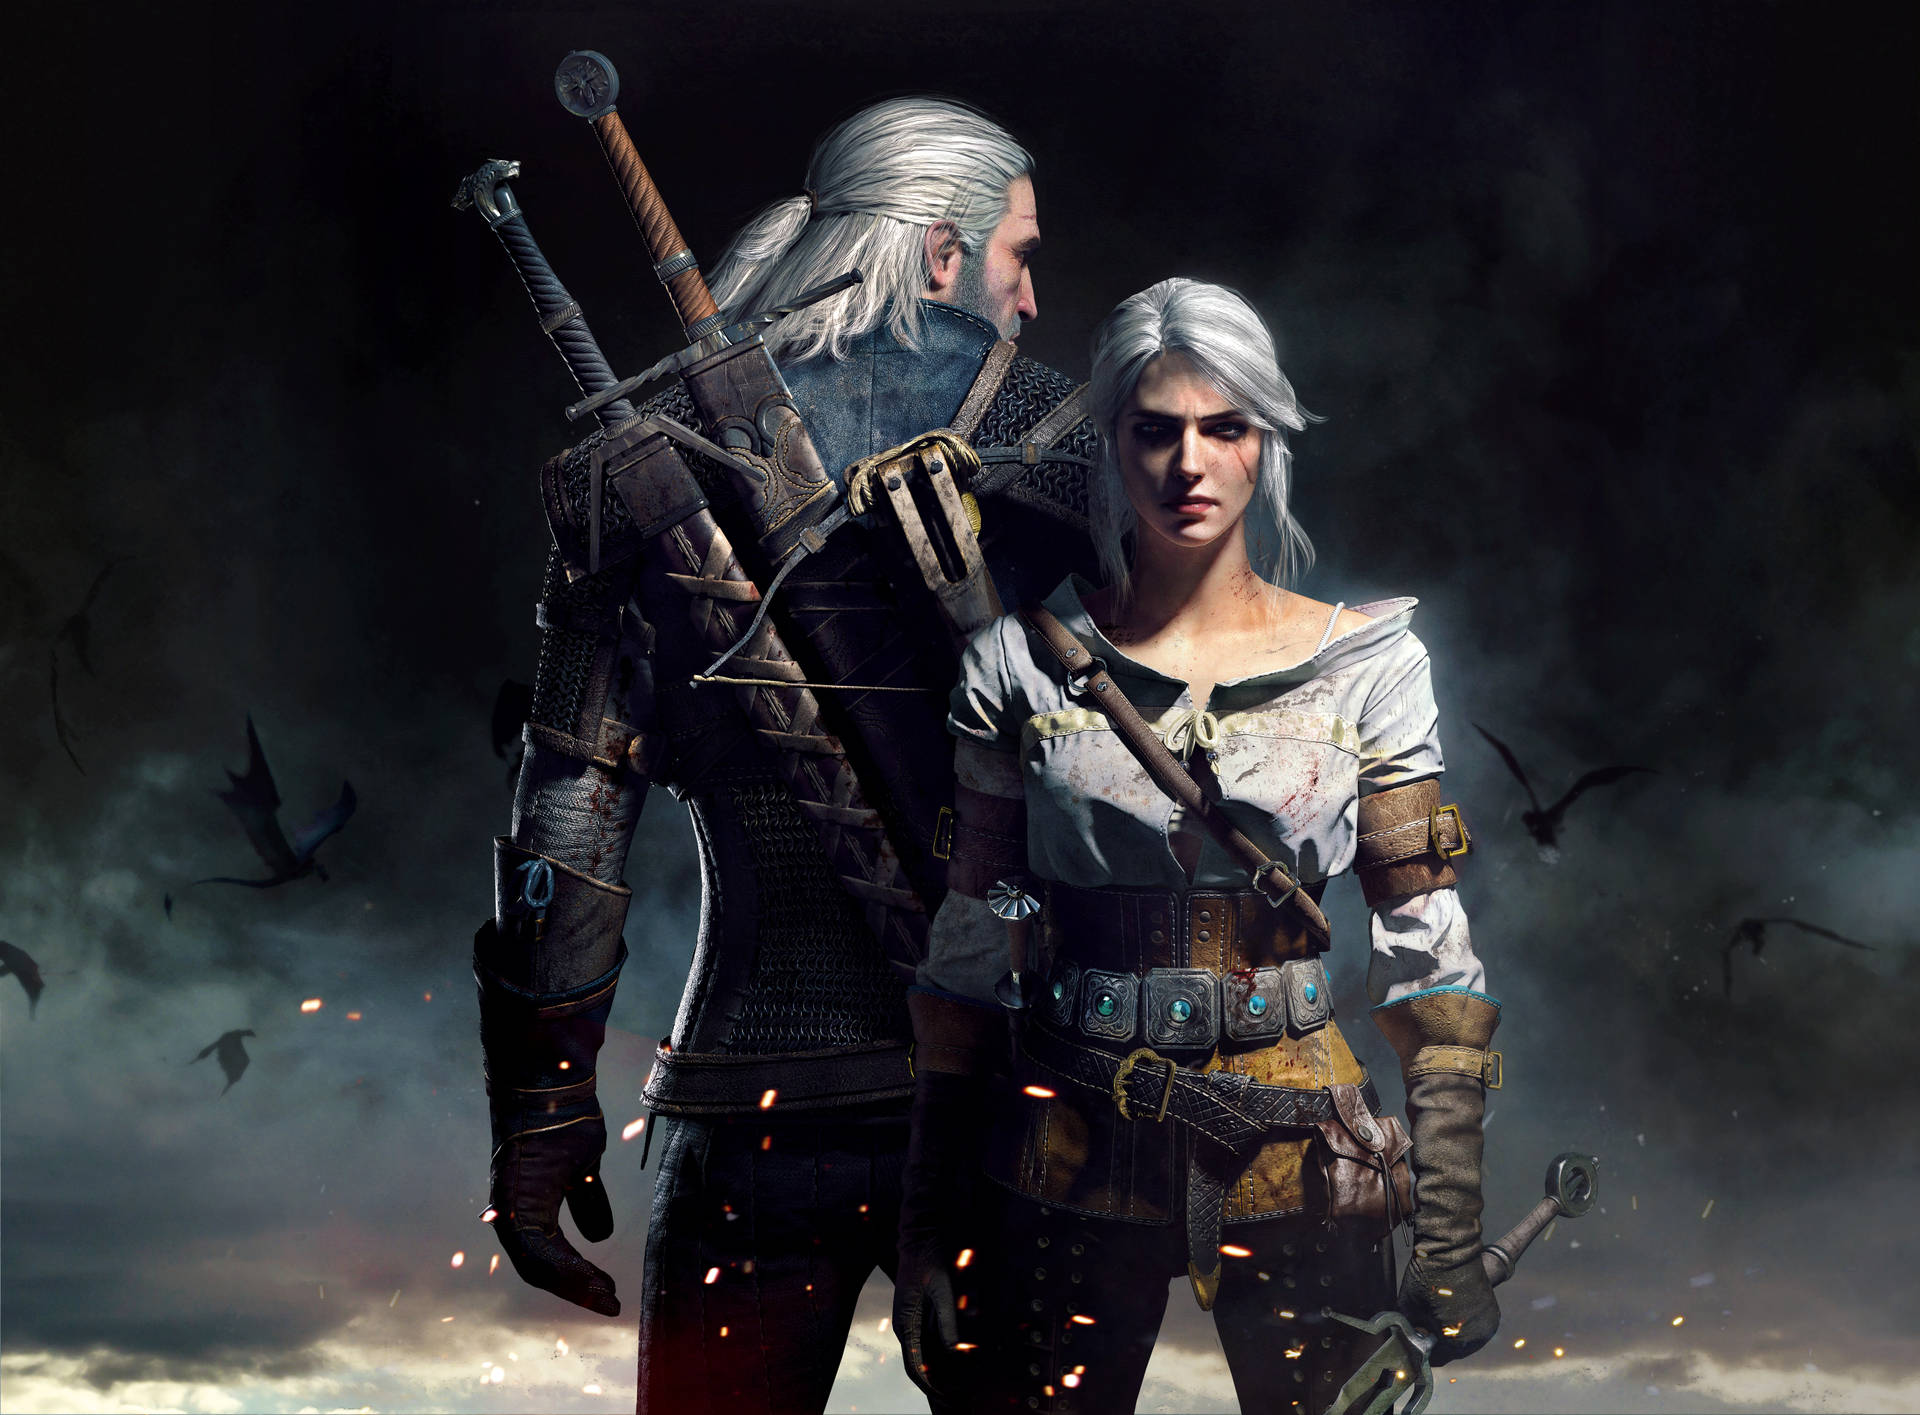 Top 999+ Witcher 3 Wallpaper Full HD, 4K✅Free to Use